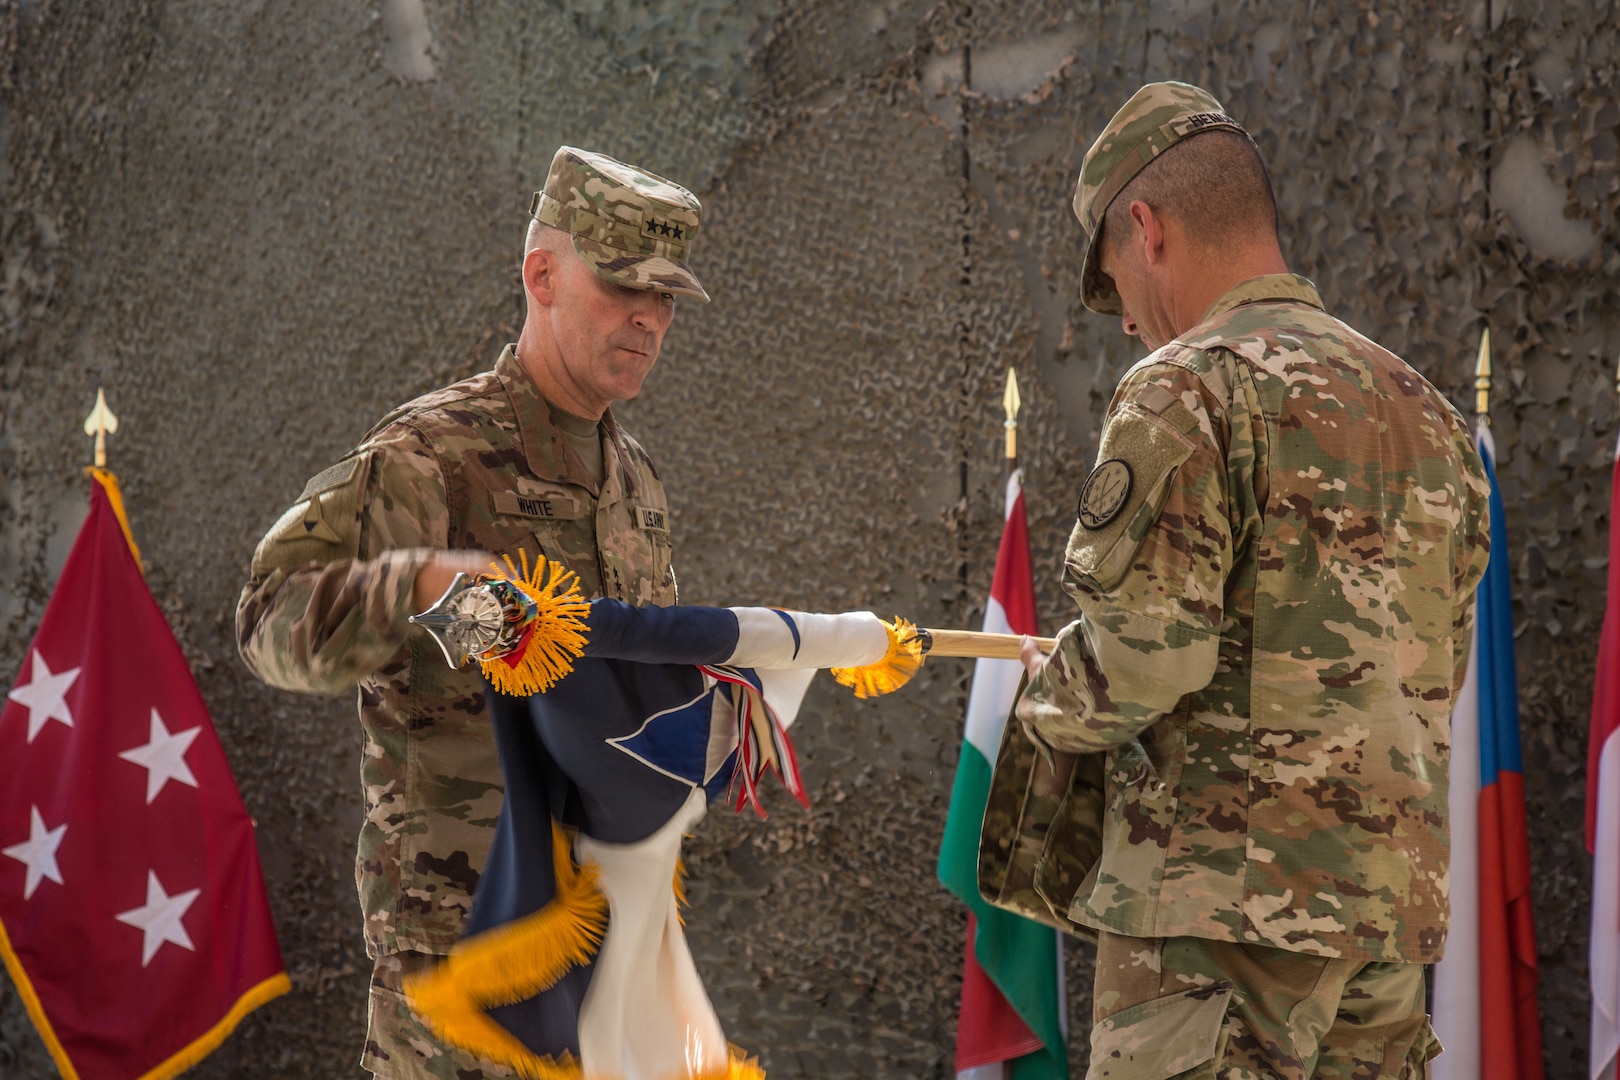 U.S. Army Lt. Gen. Robert White, commanding general of III Armored Corps, and Command Sgt. Maj. Daniel Hendrex, command sergeant major of III Armored Corps, uncase the III Armored Corps colors at the Combined Joint Task Force – Operation Inherent Resolve transfer of authority ceremony in Baghdad, Iraq, Sept. 14, 2019. The U.S. Army’s XVIII Airborne Corps, deployed from Fort Bragg, North Carolina to areas in Southwest Asia, transferred its command authority to the III Armored Corps, deployed from Fort Hood, Texas. CJTF-OIR is a 81-member global coalition, which works by, with, and through partner forces to defeat ISIS in designated areas of Iraq and Syria, and sets conditions for follow-on operations to increase regional stability.